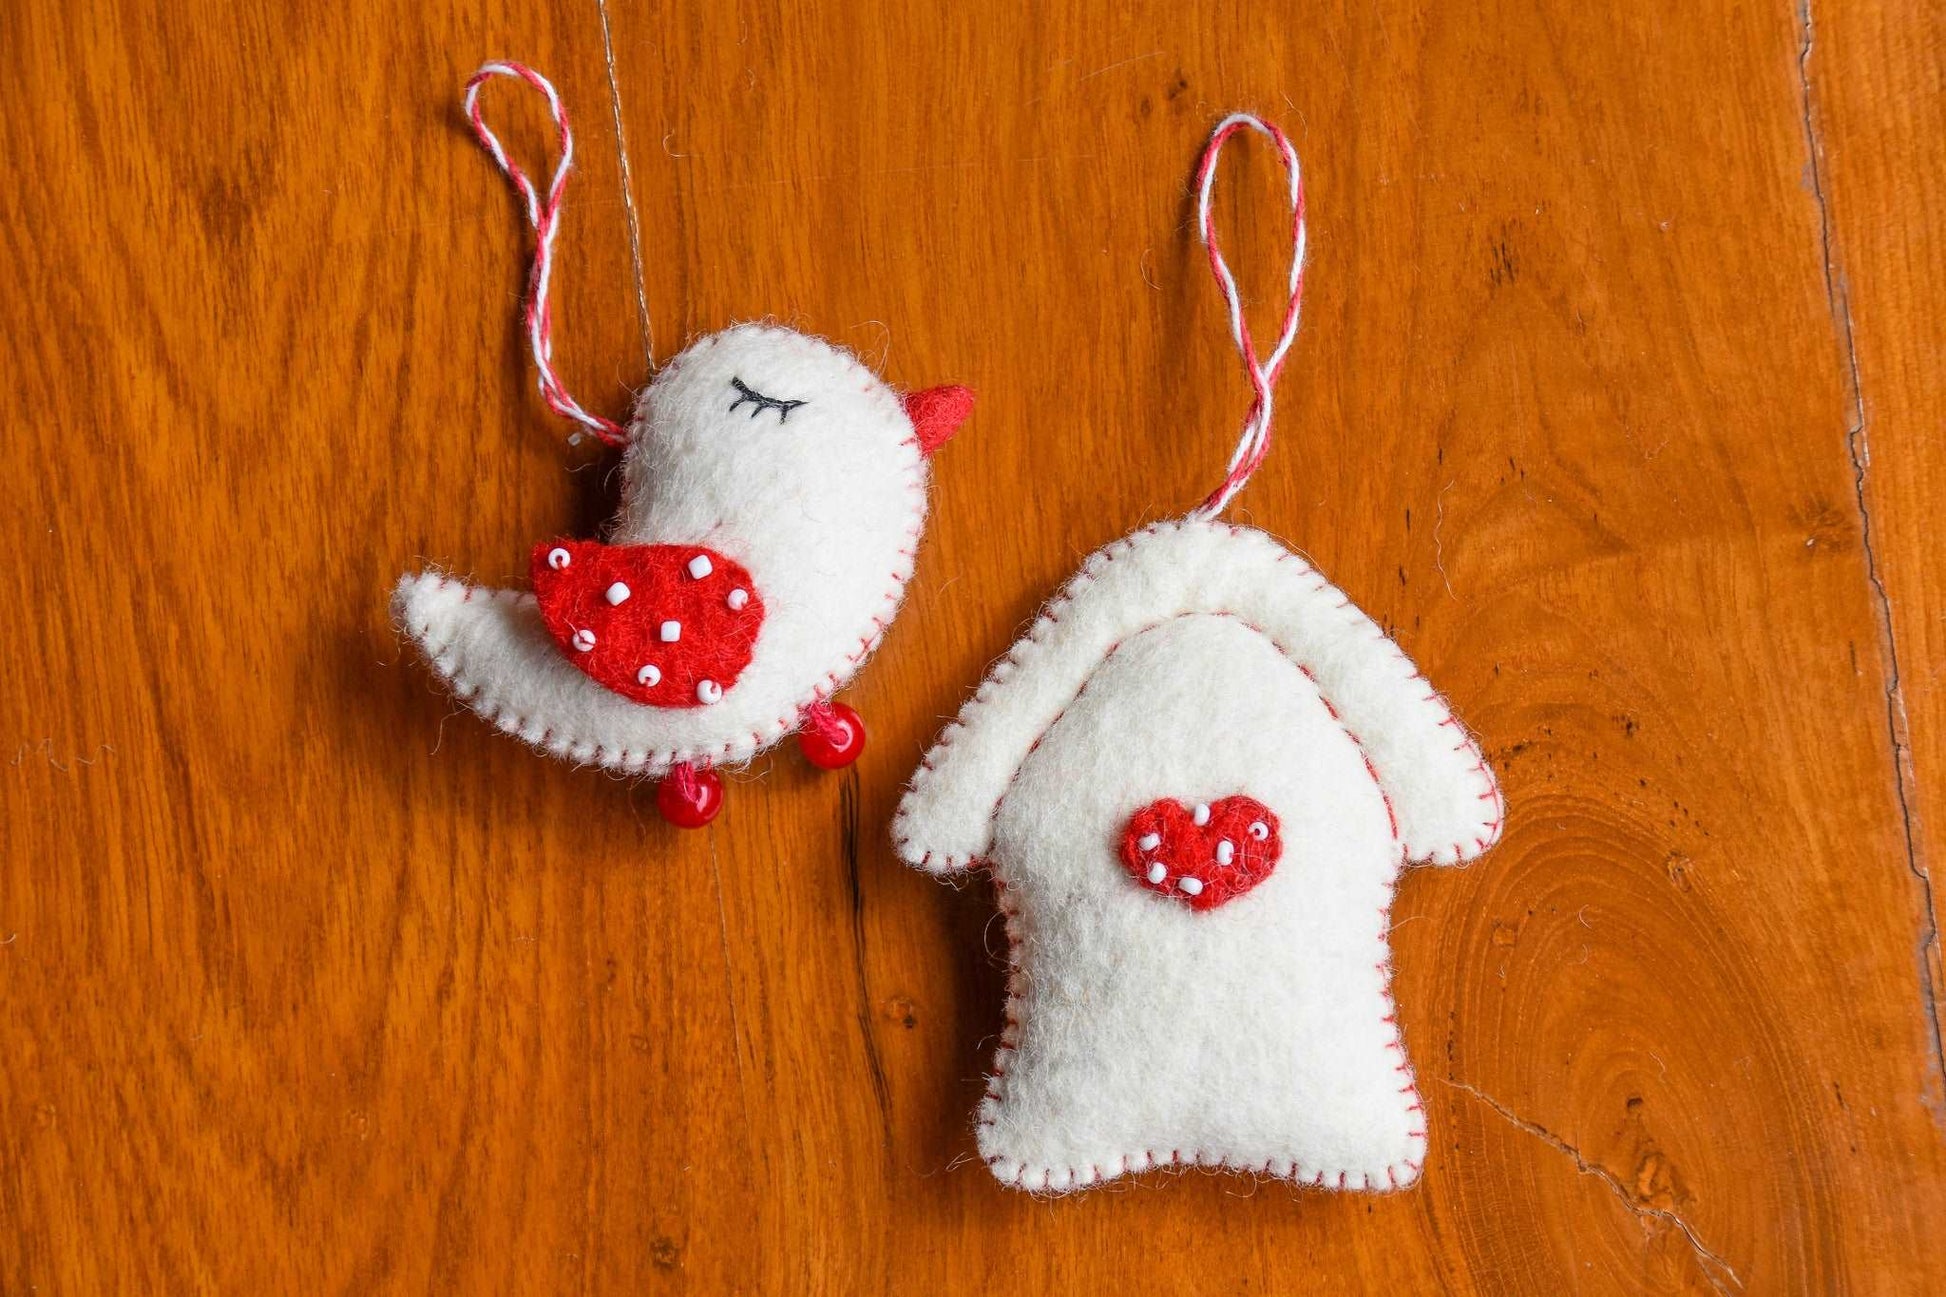 Home is Where the Heart Is Handmade Felt Ornaments--Set of 2